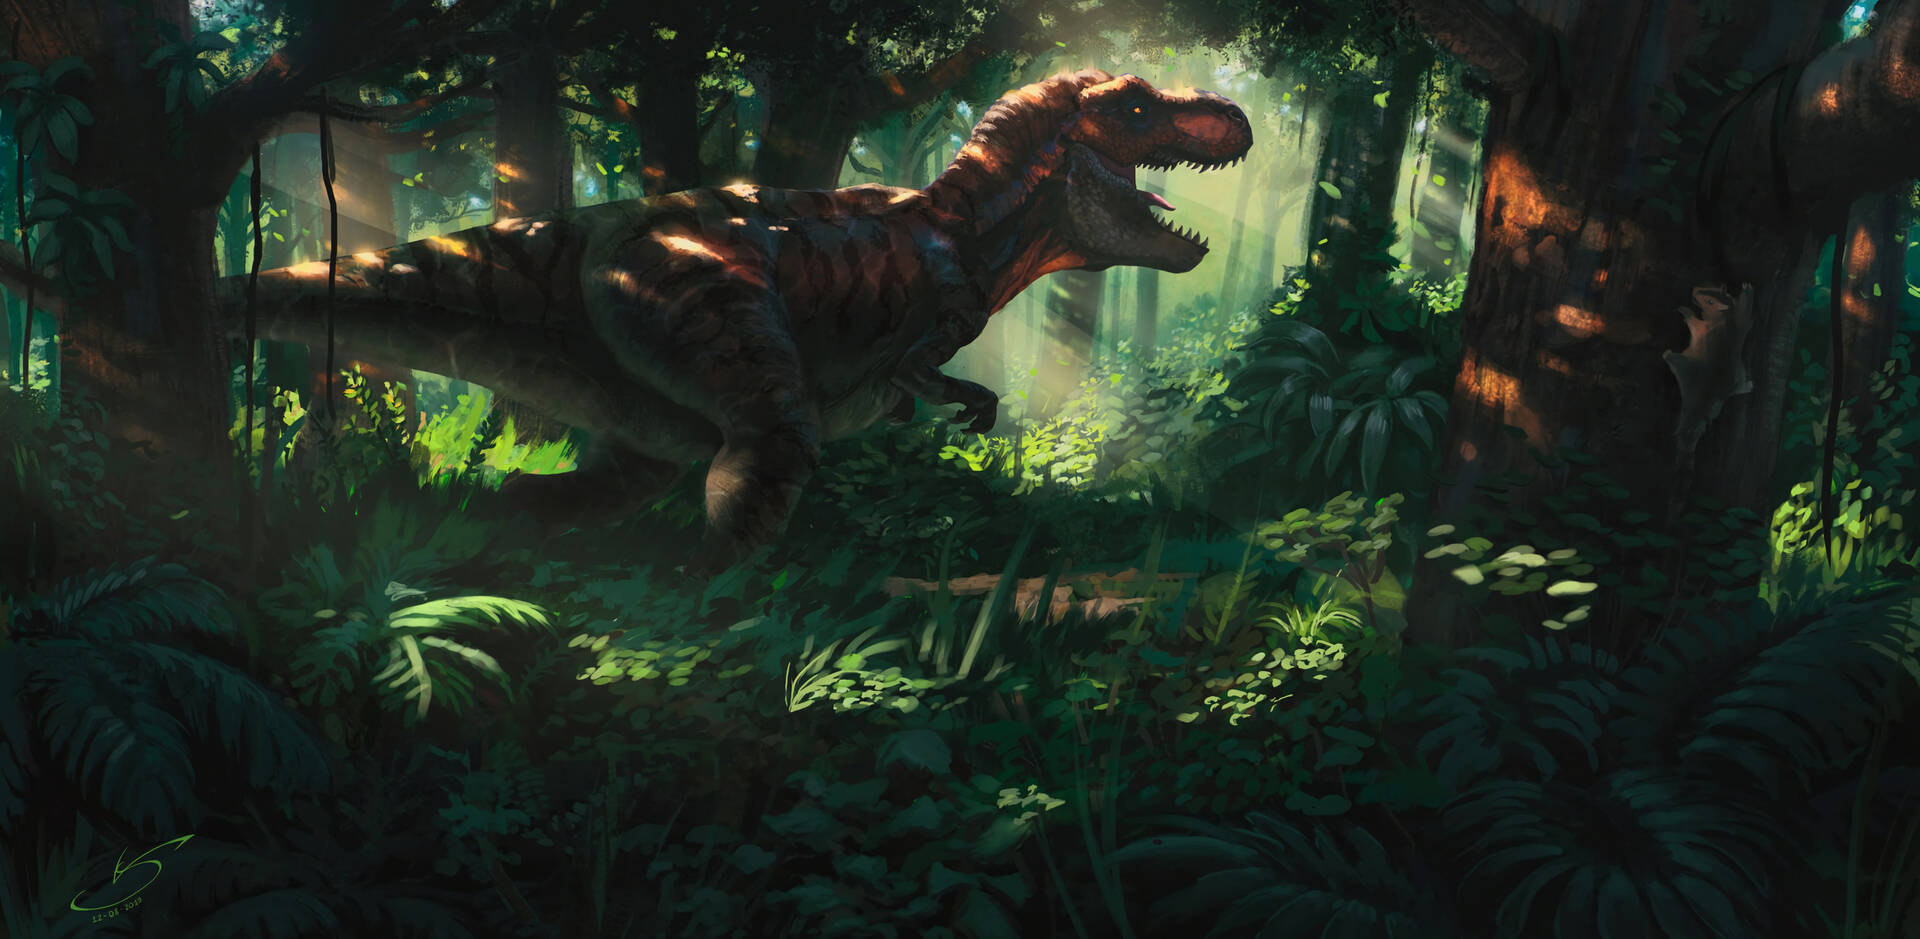 Feel the power of T Rex as you explore the incredible world of Dinosaurs Wallpaper